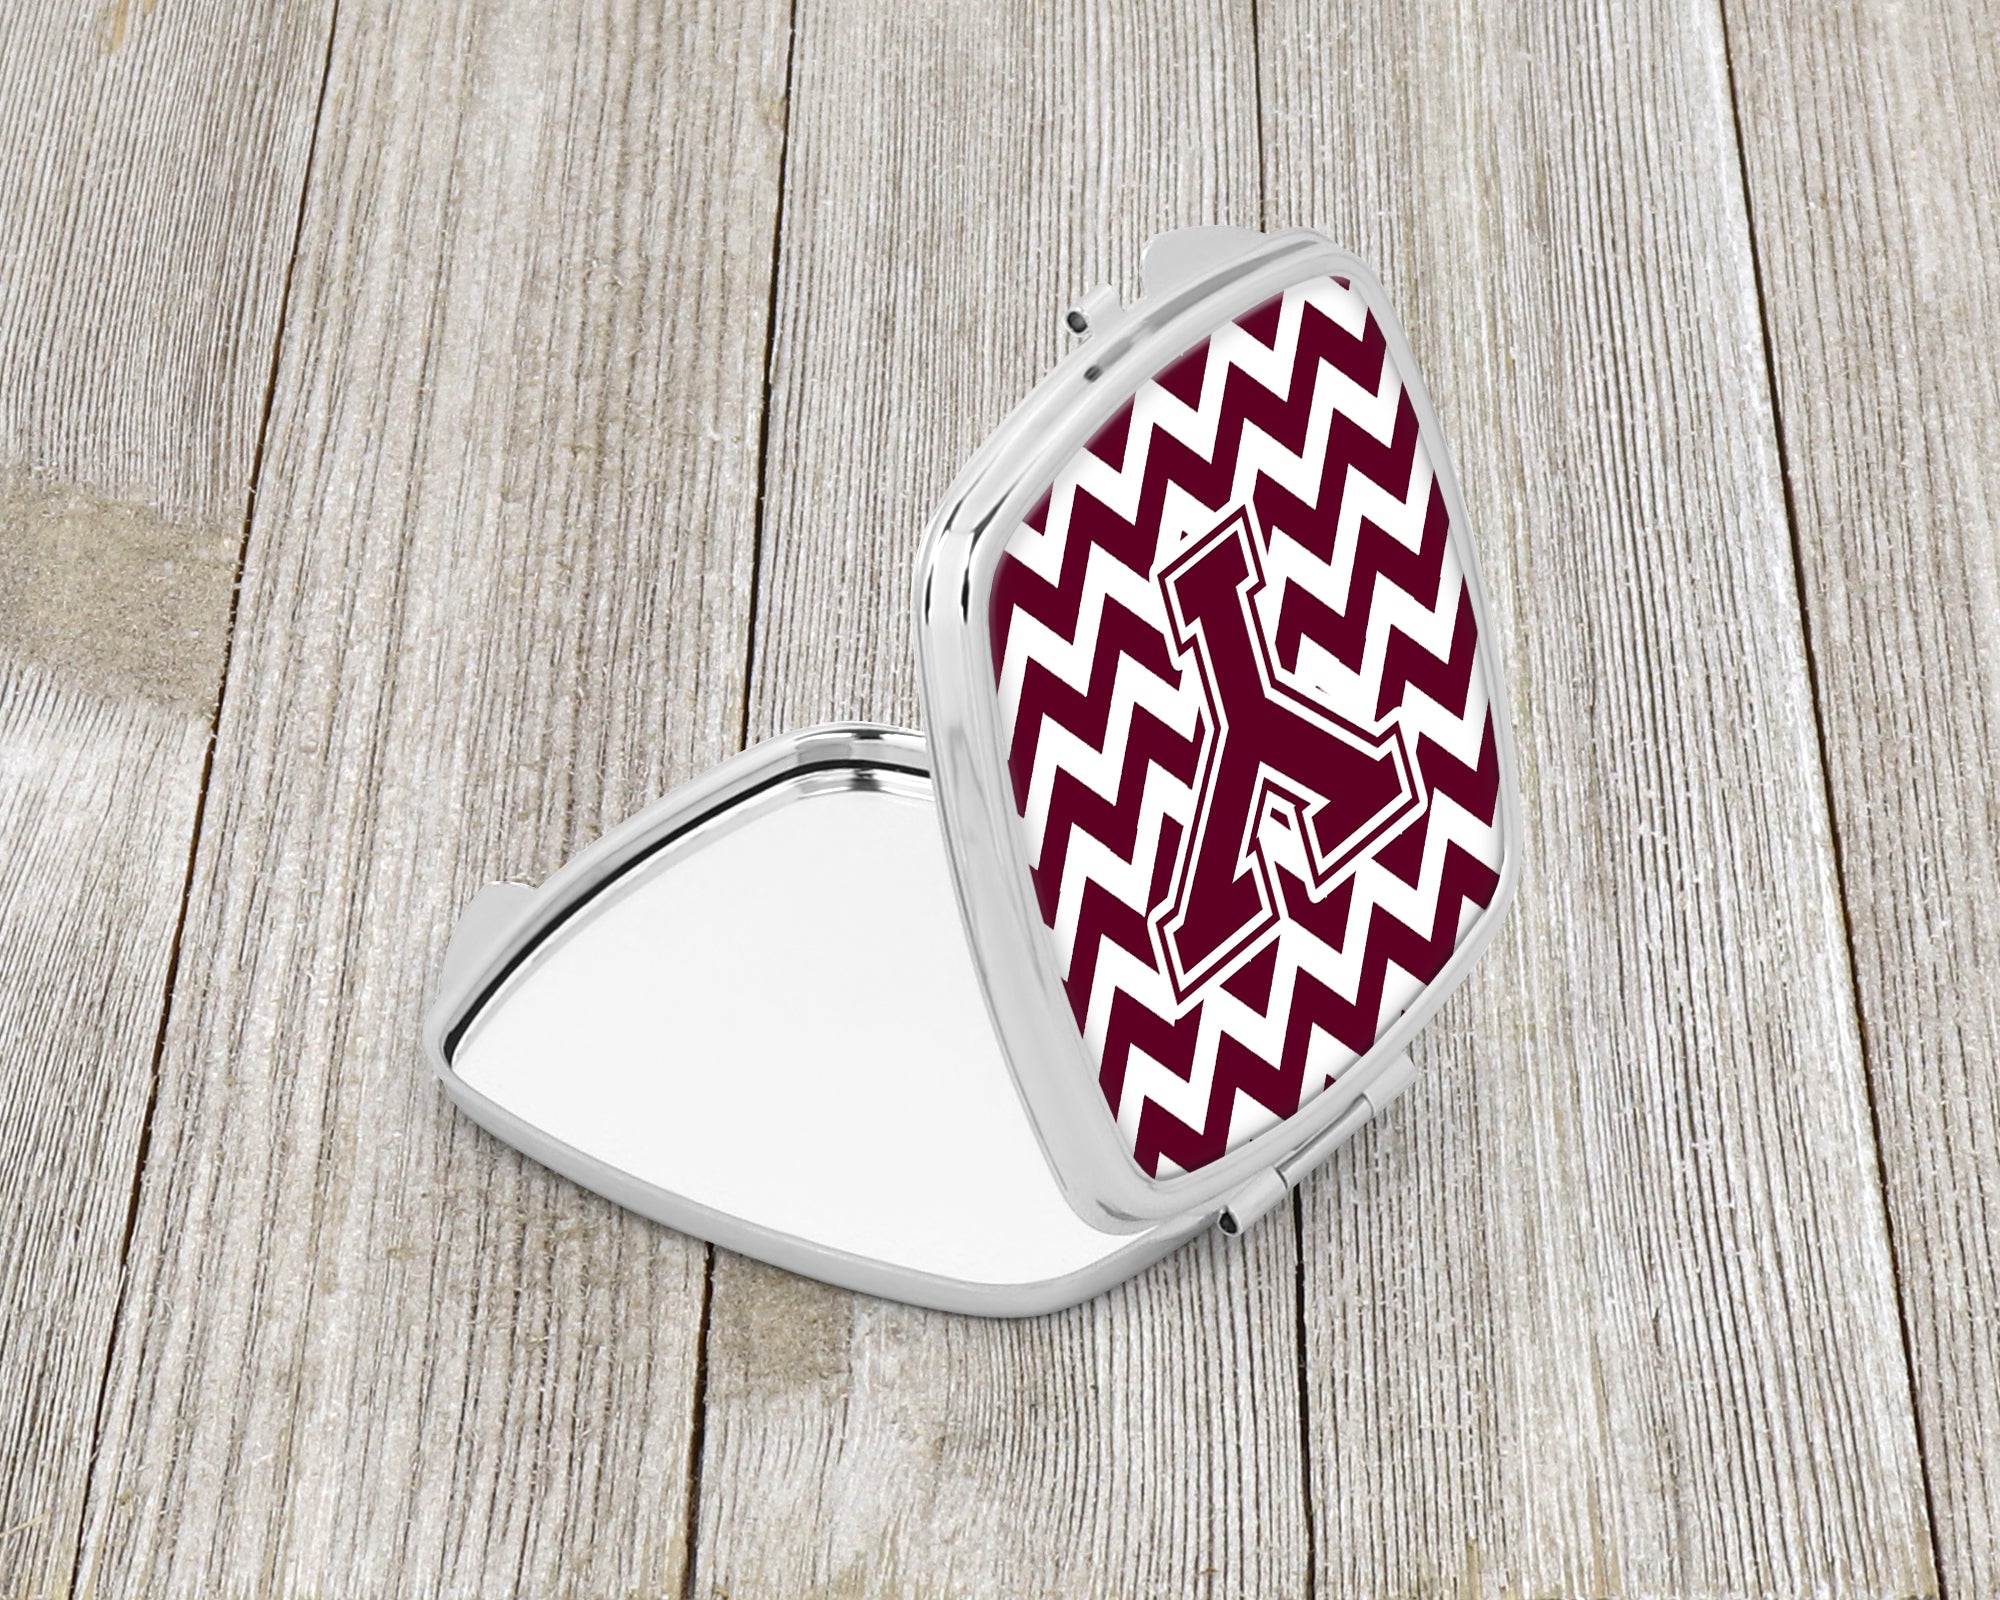 Letter Y Chevron Maroon and White  Compact Mirror CJ1051-YSCM